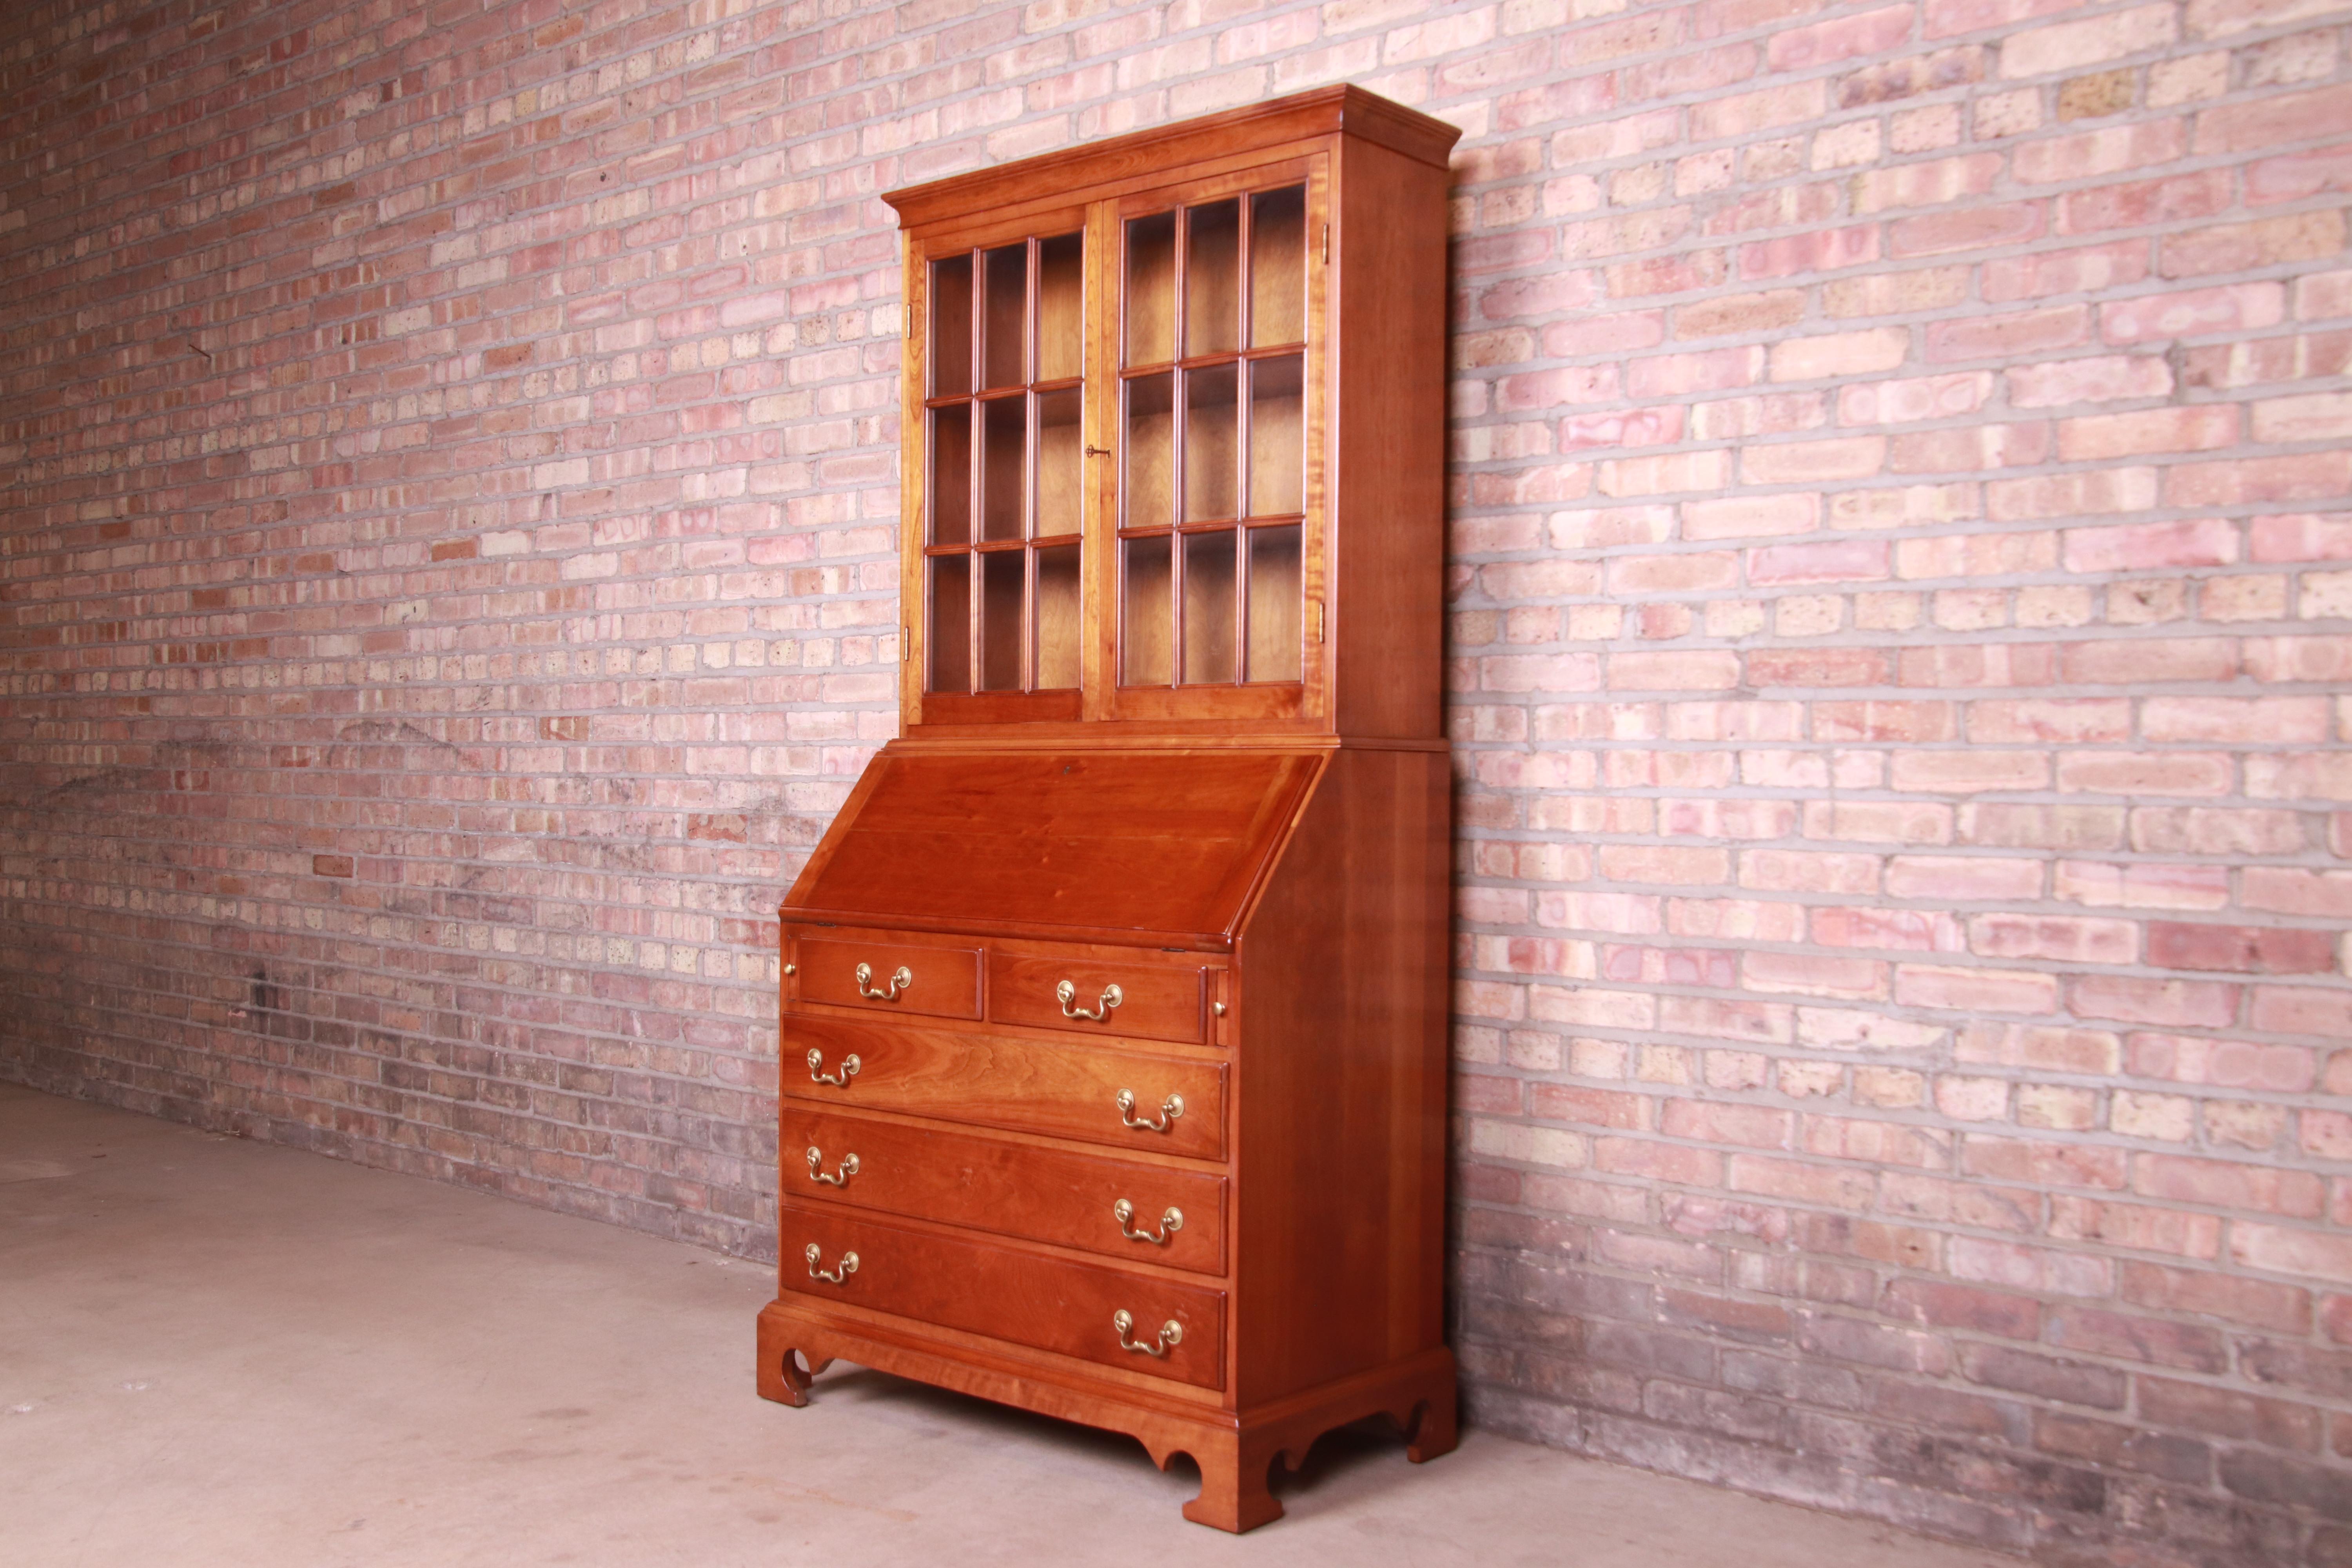 A gorgeous mid-century early American style bureau with drop front secretary desk and bookcase hutch top

By L. & J.G. Stickley

USA, 1961

Solid cherry wood, with mullioned glass front bookcase and original brass hardware.

Measures: